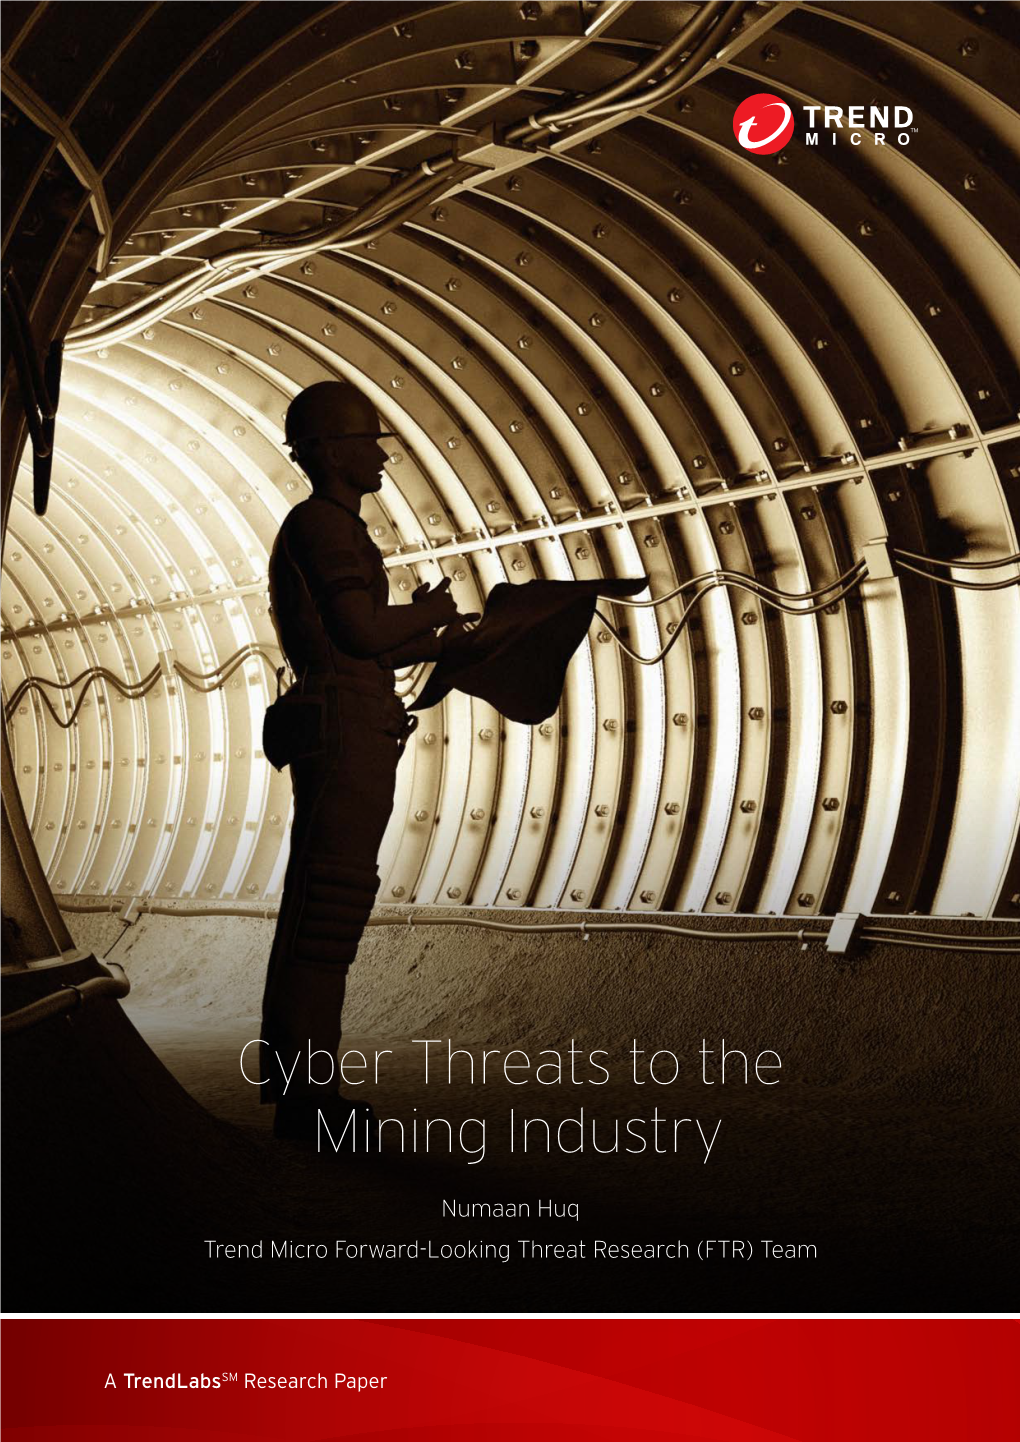 Cyber Threats to the Mining Industry